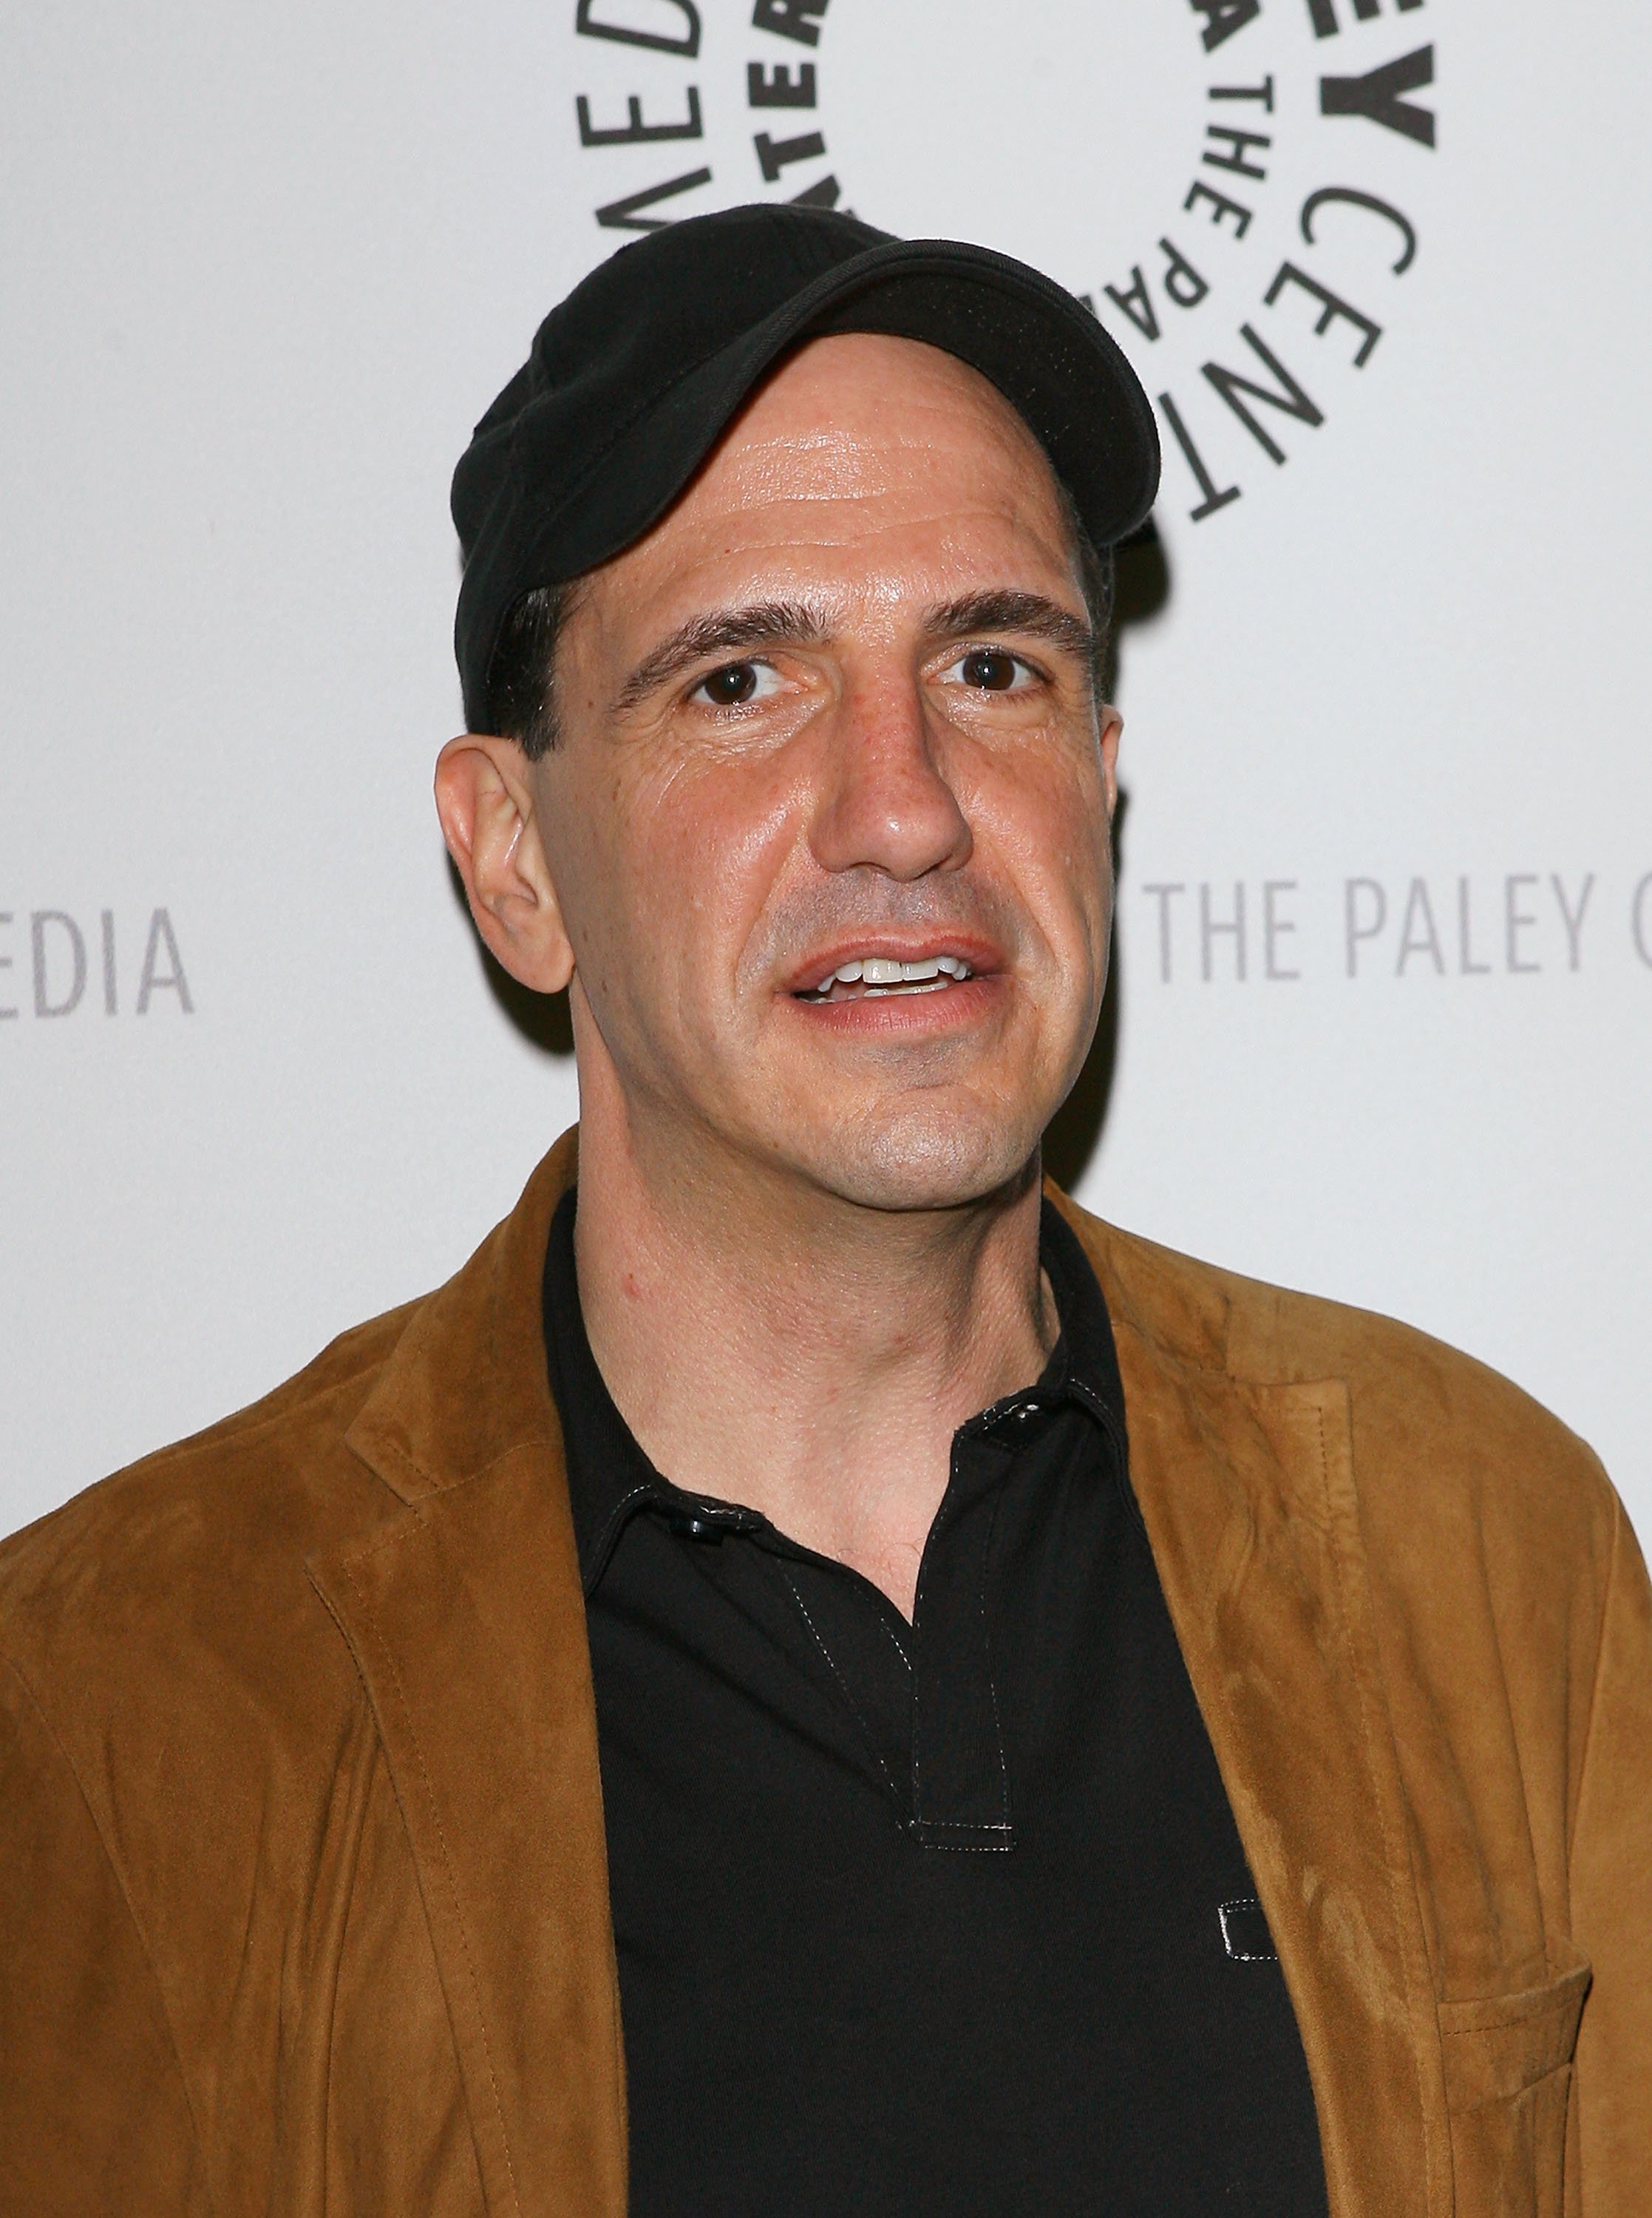 Actor Sam Lloyd at the "Scrubs: The Farewell Tour" held at The Paley Center for Media in Beverly Hills, California | Photo: Michael Tran/FilmMagic